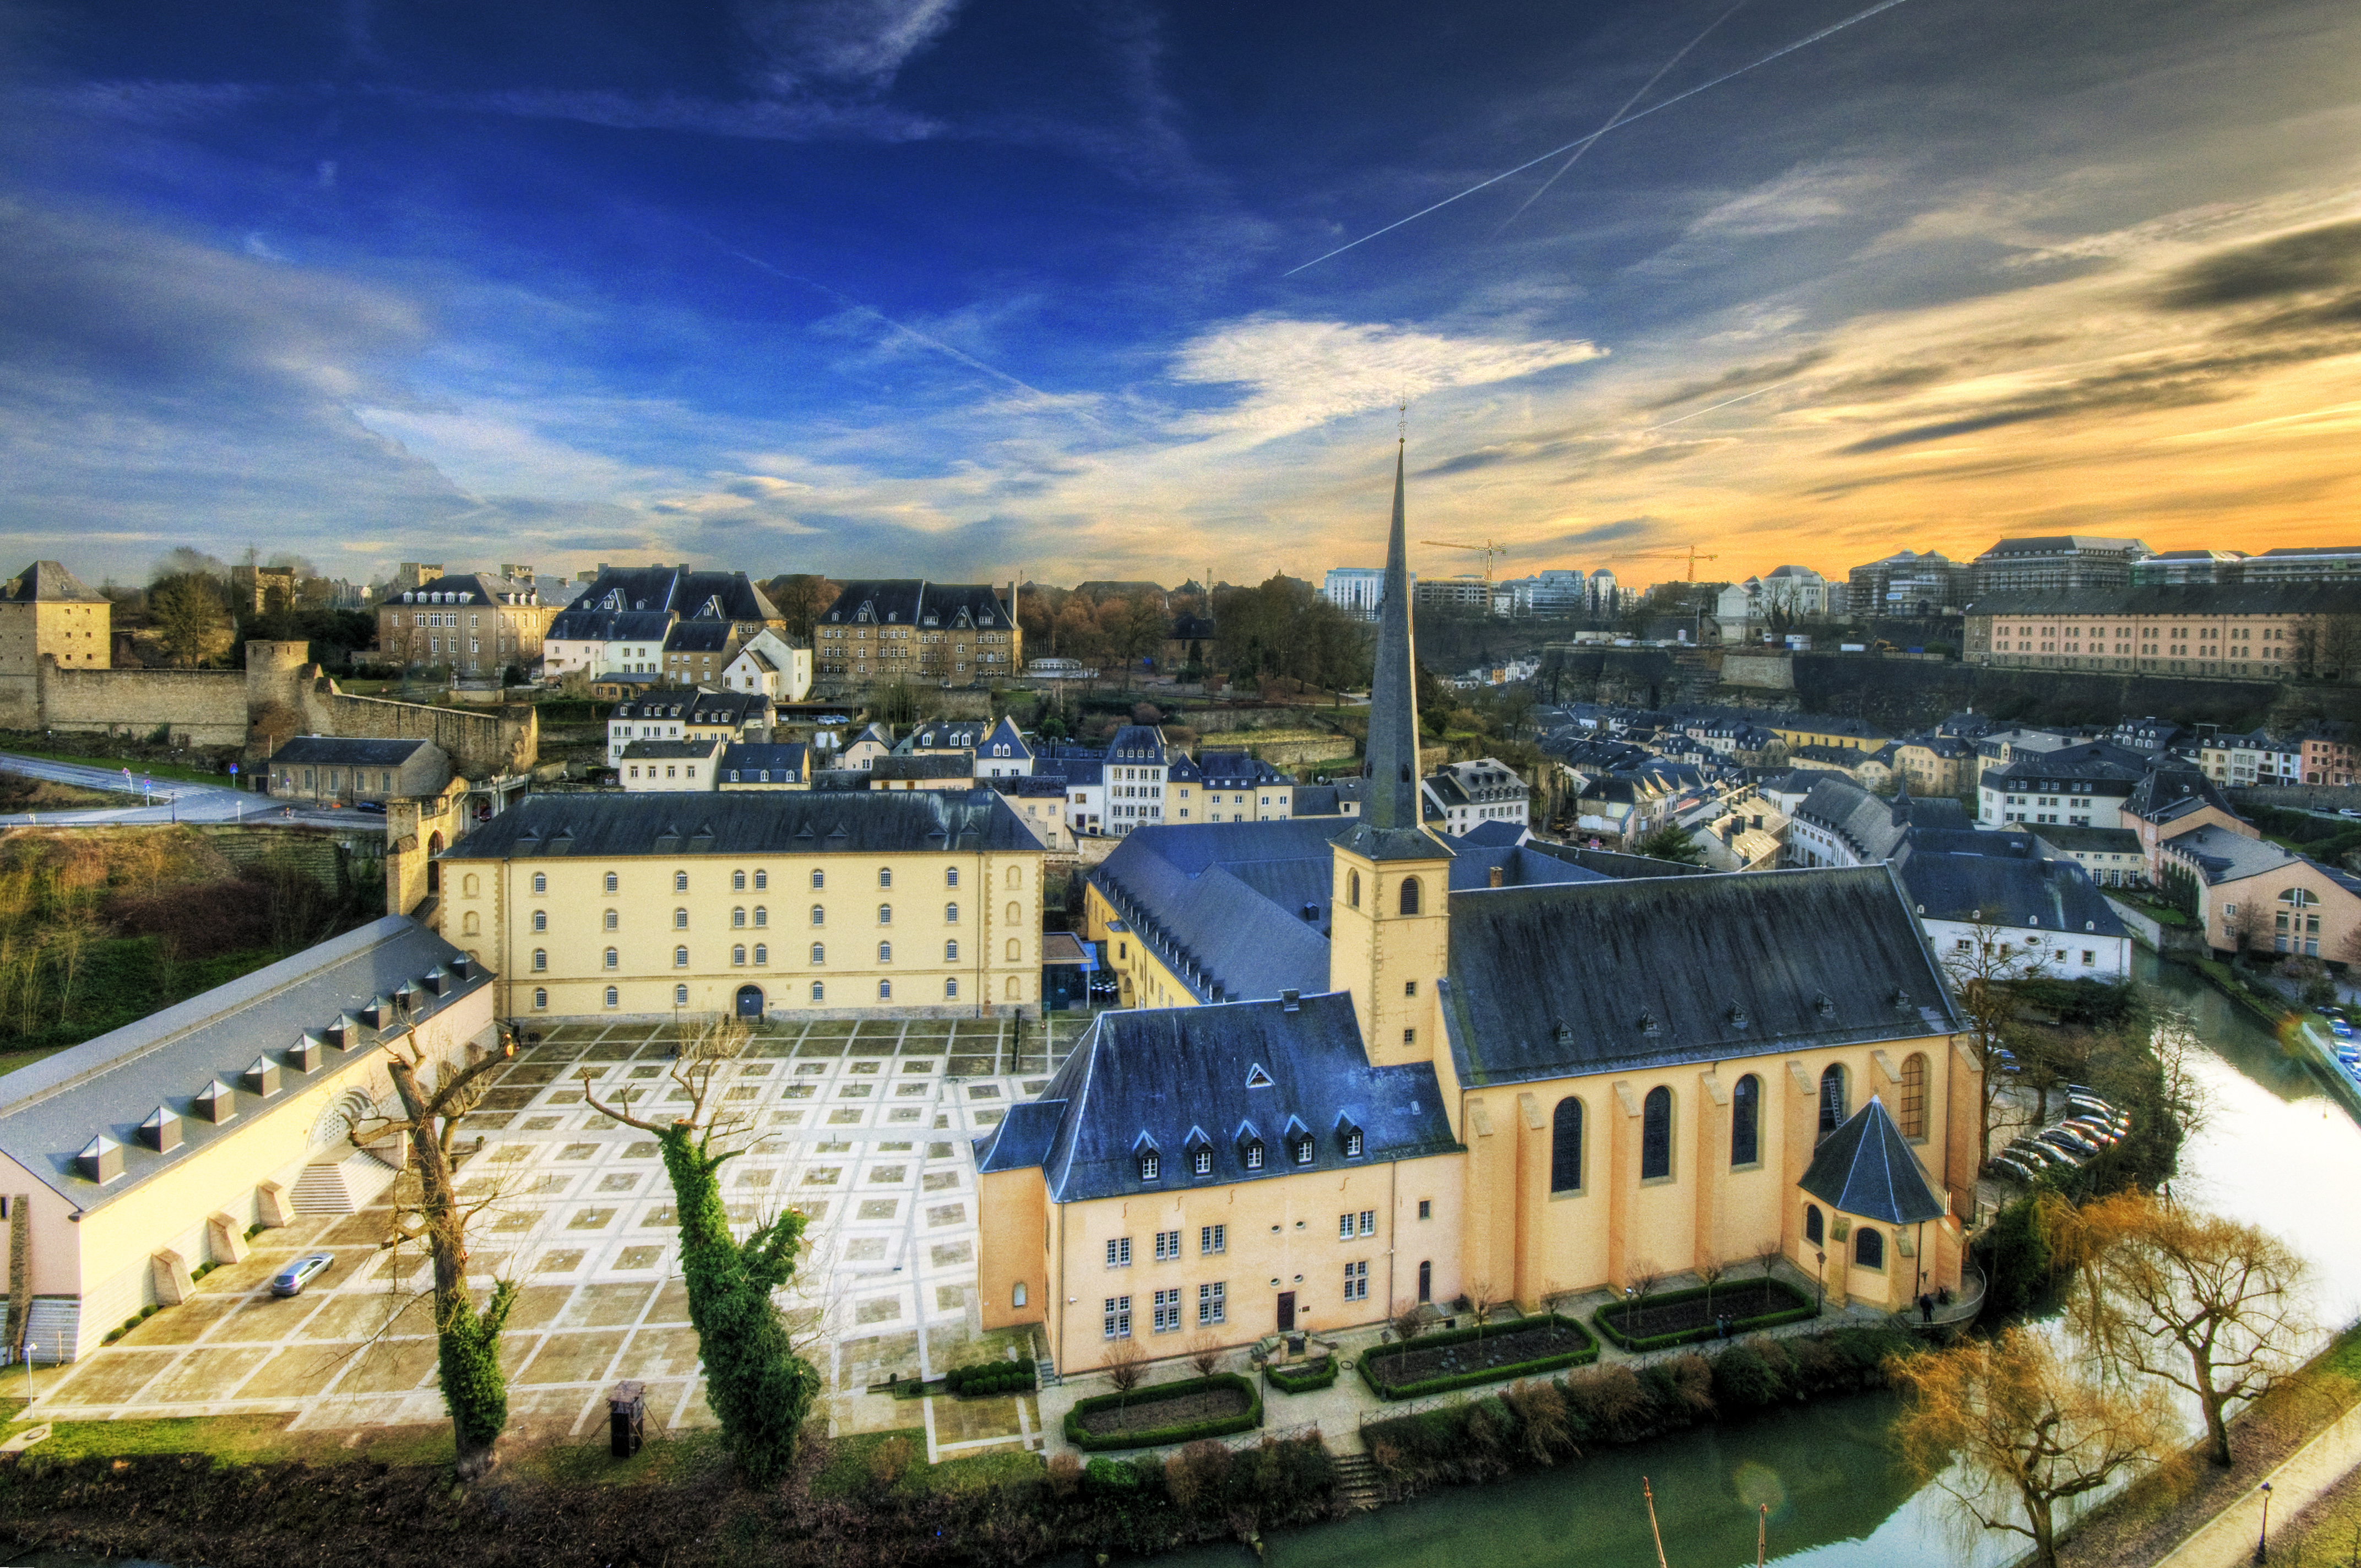 Luxembourg in fun facts you probably didn’t know